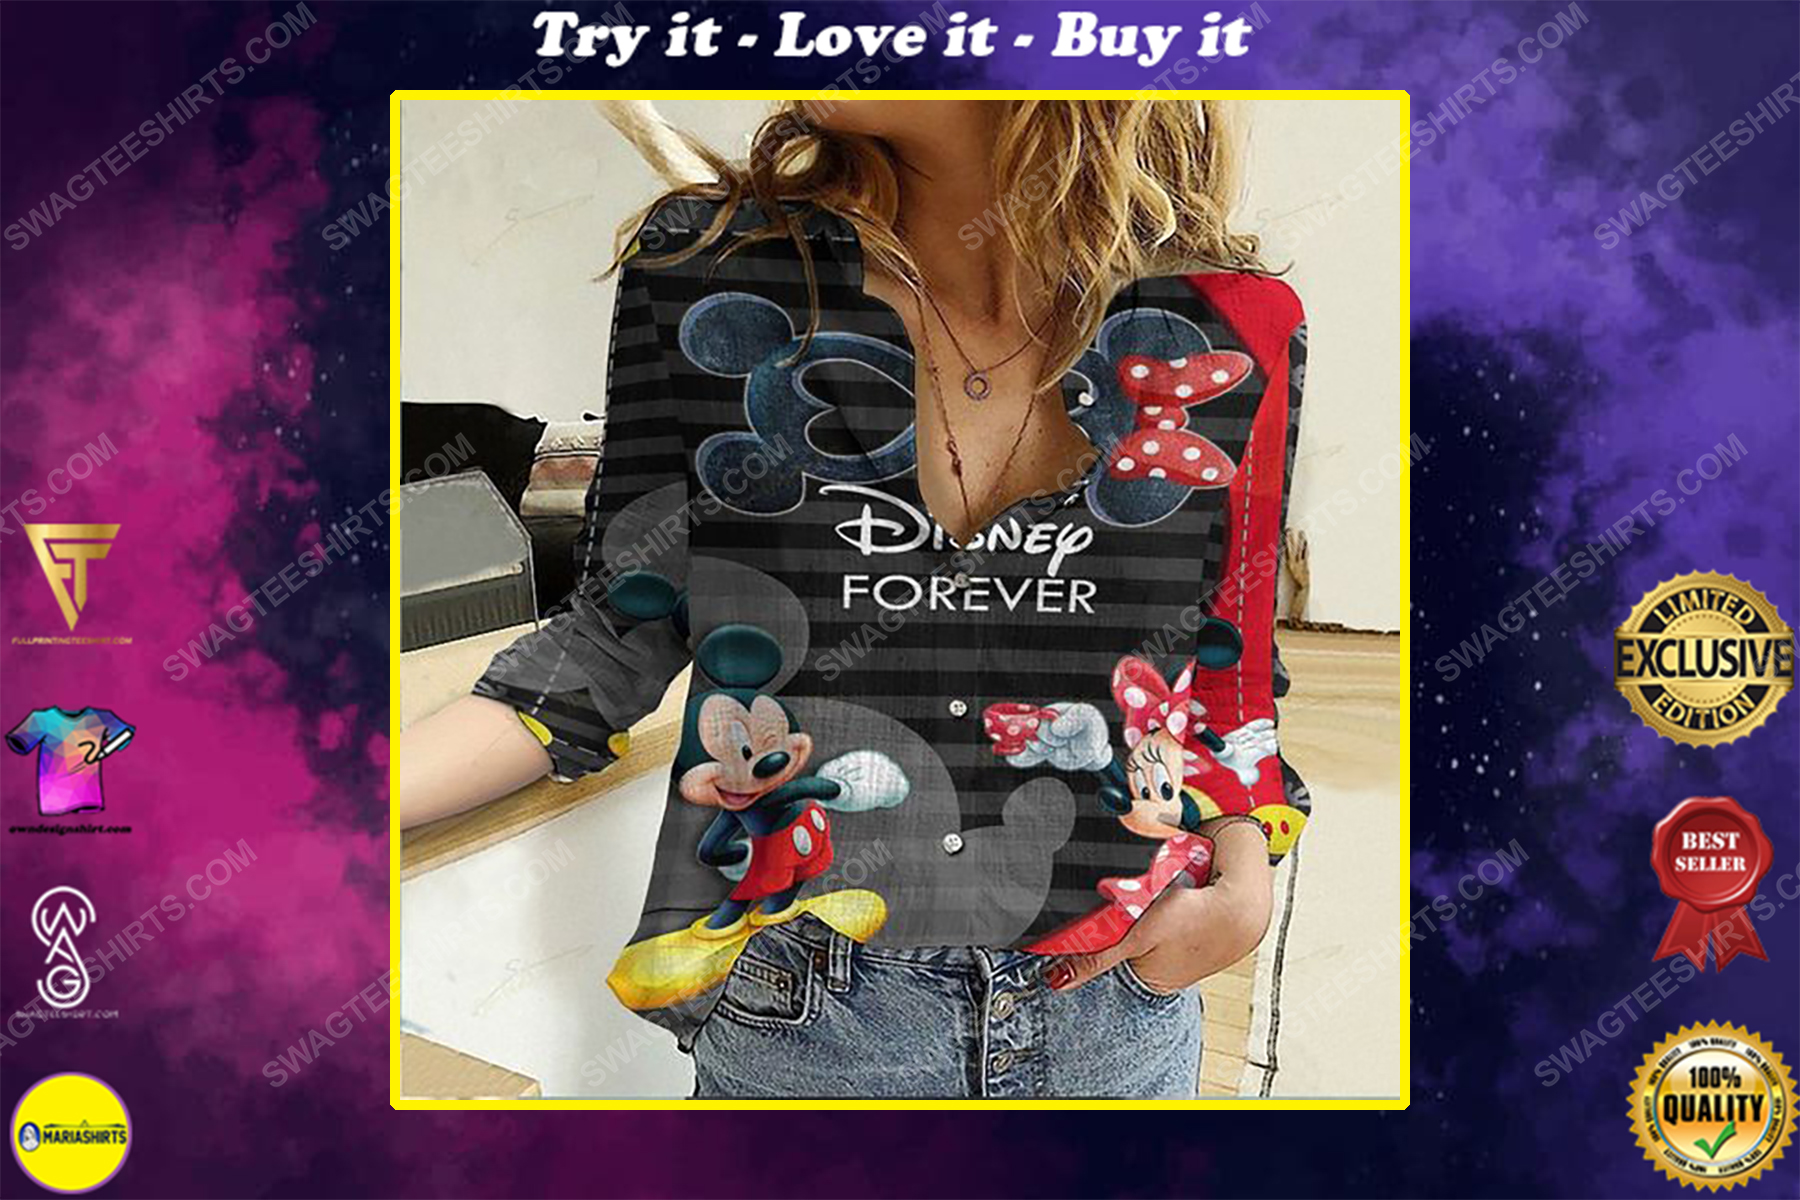 Disney forever fully printed poly cotton casual shirt